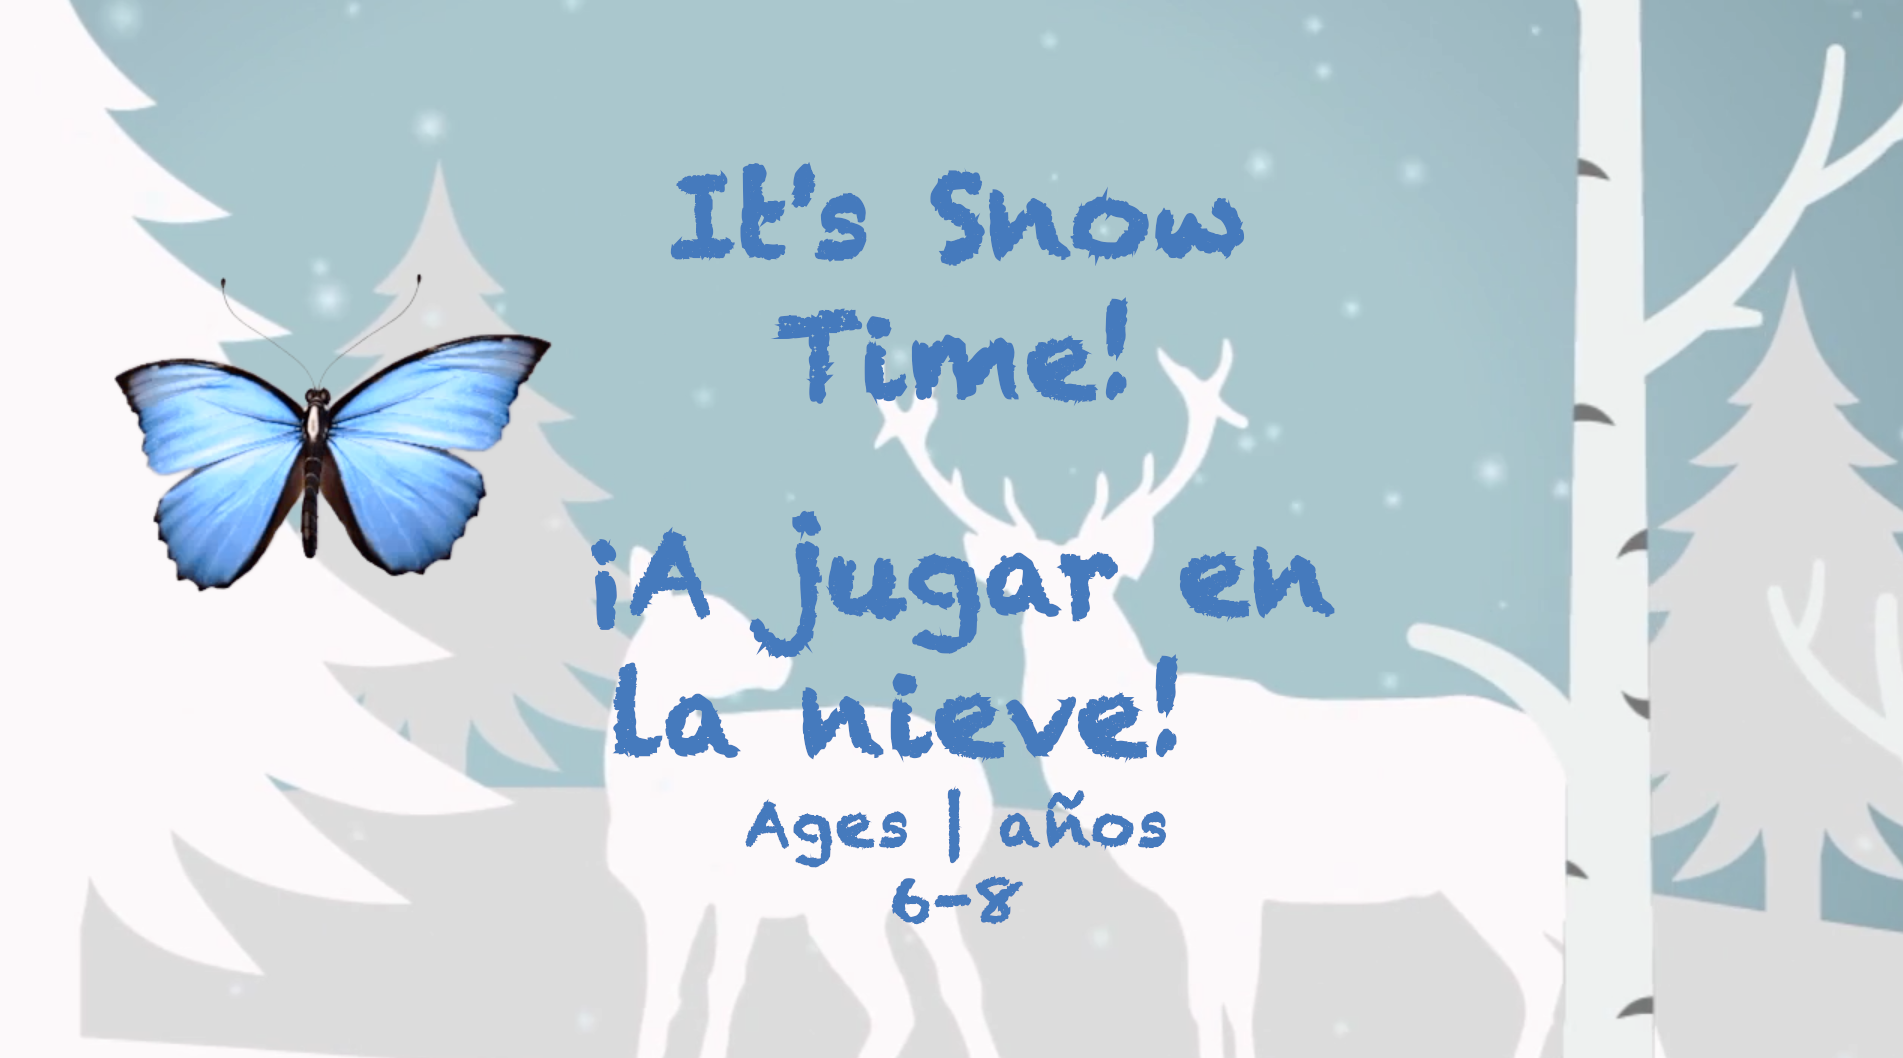 It’s Snow Time! for 6-8 year olds